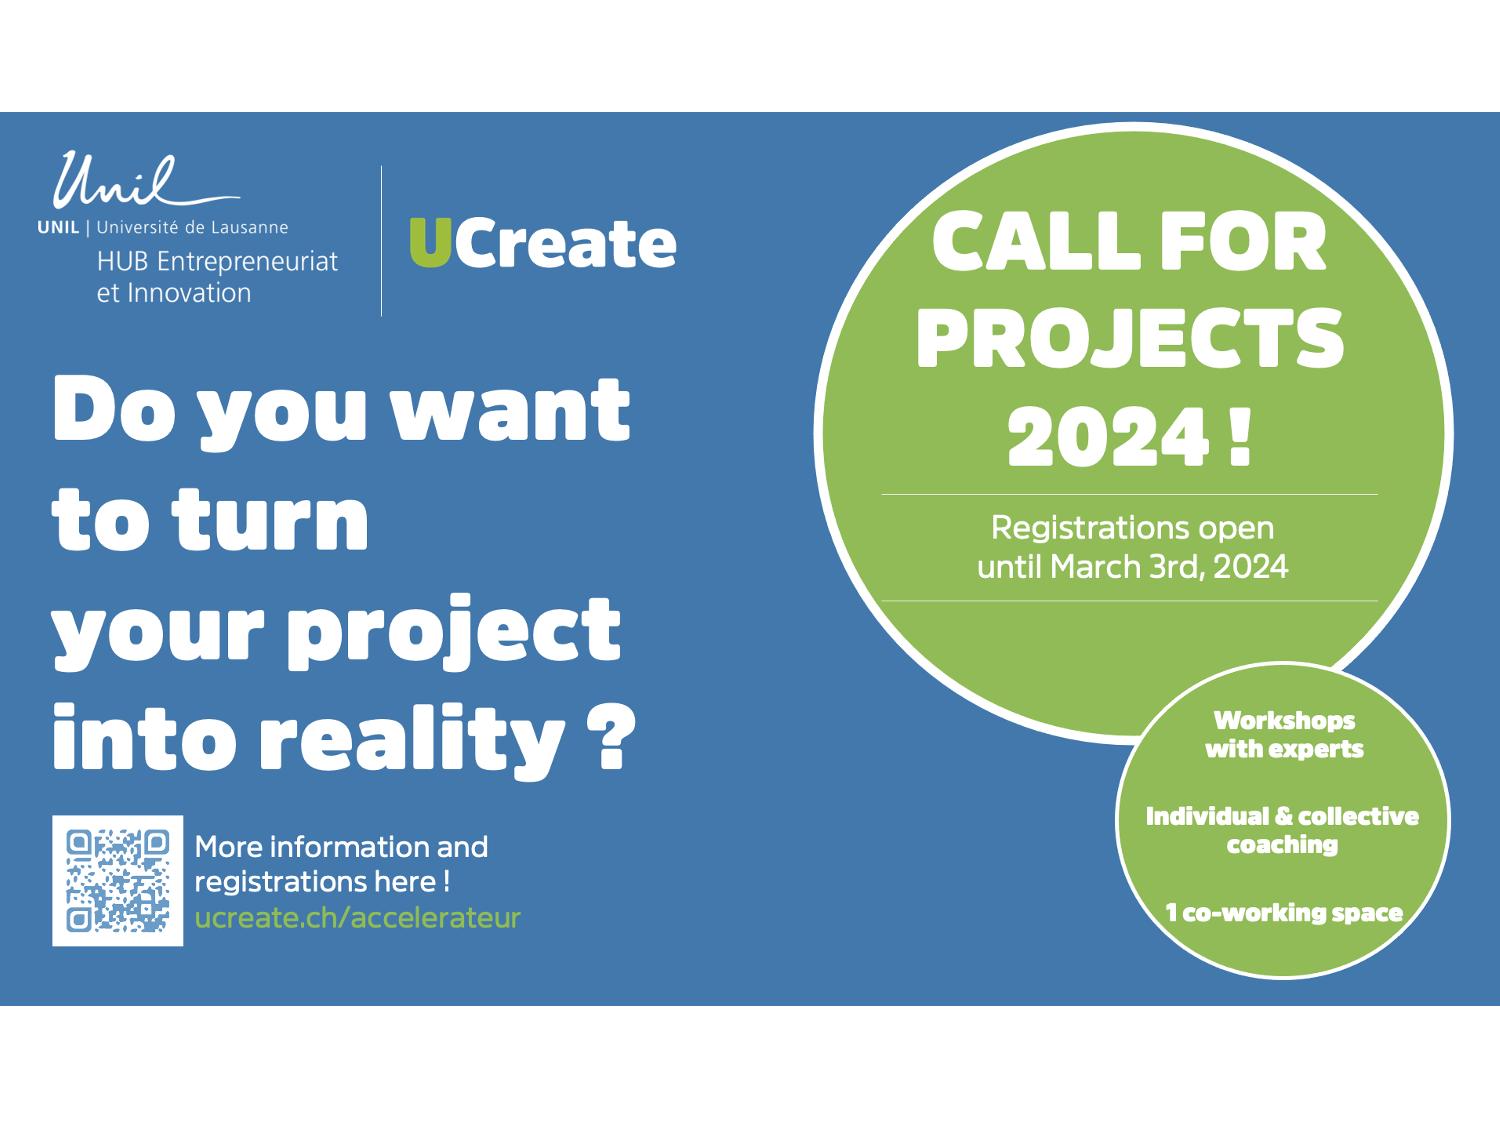 UCreate - Call for projects to join the spring 2024 session